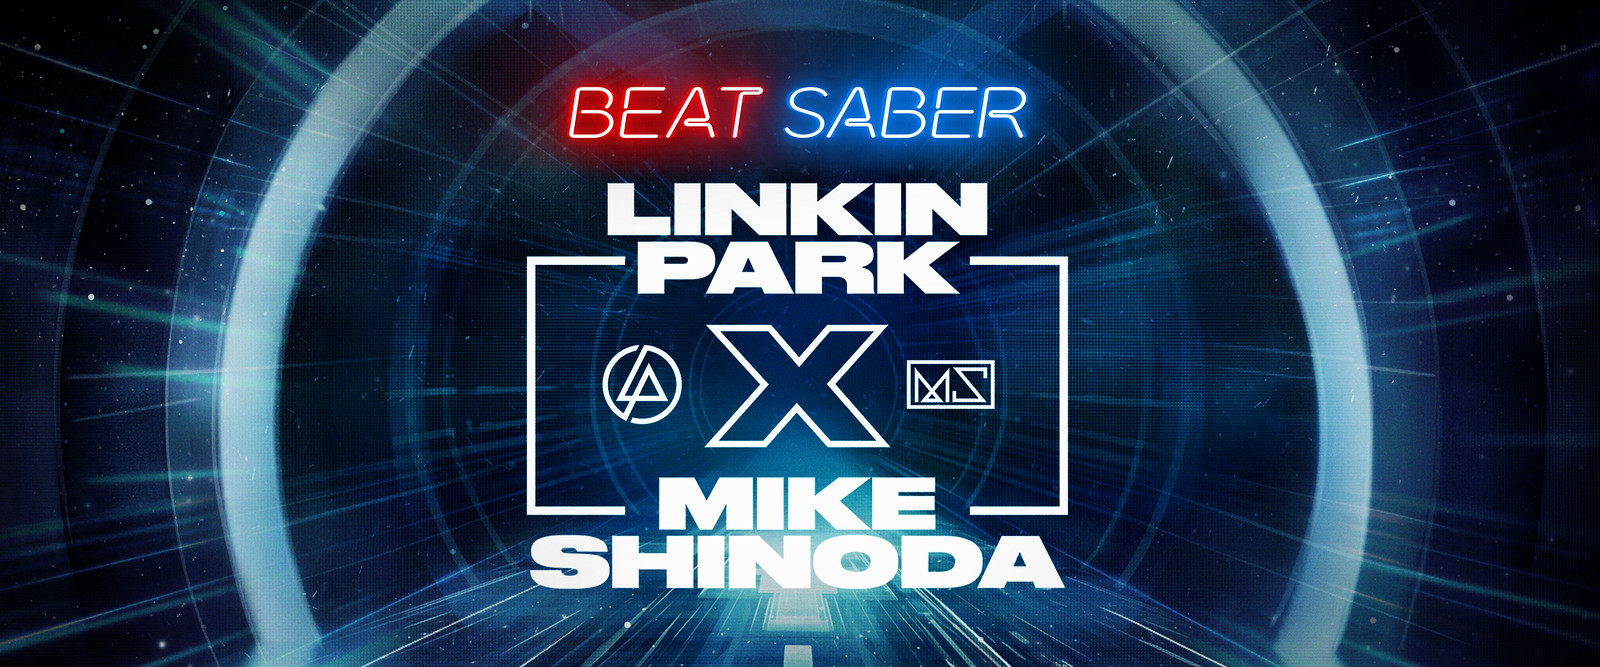 Beat Saber launches Linkin Park x Mike Shinoda Music Pack – out